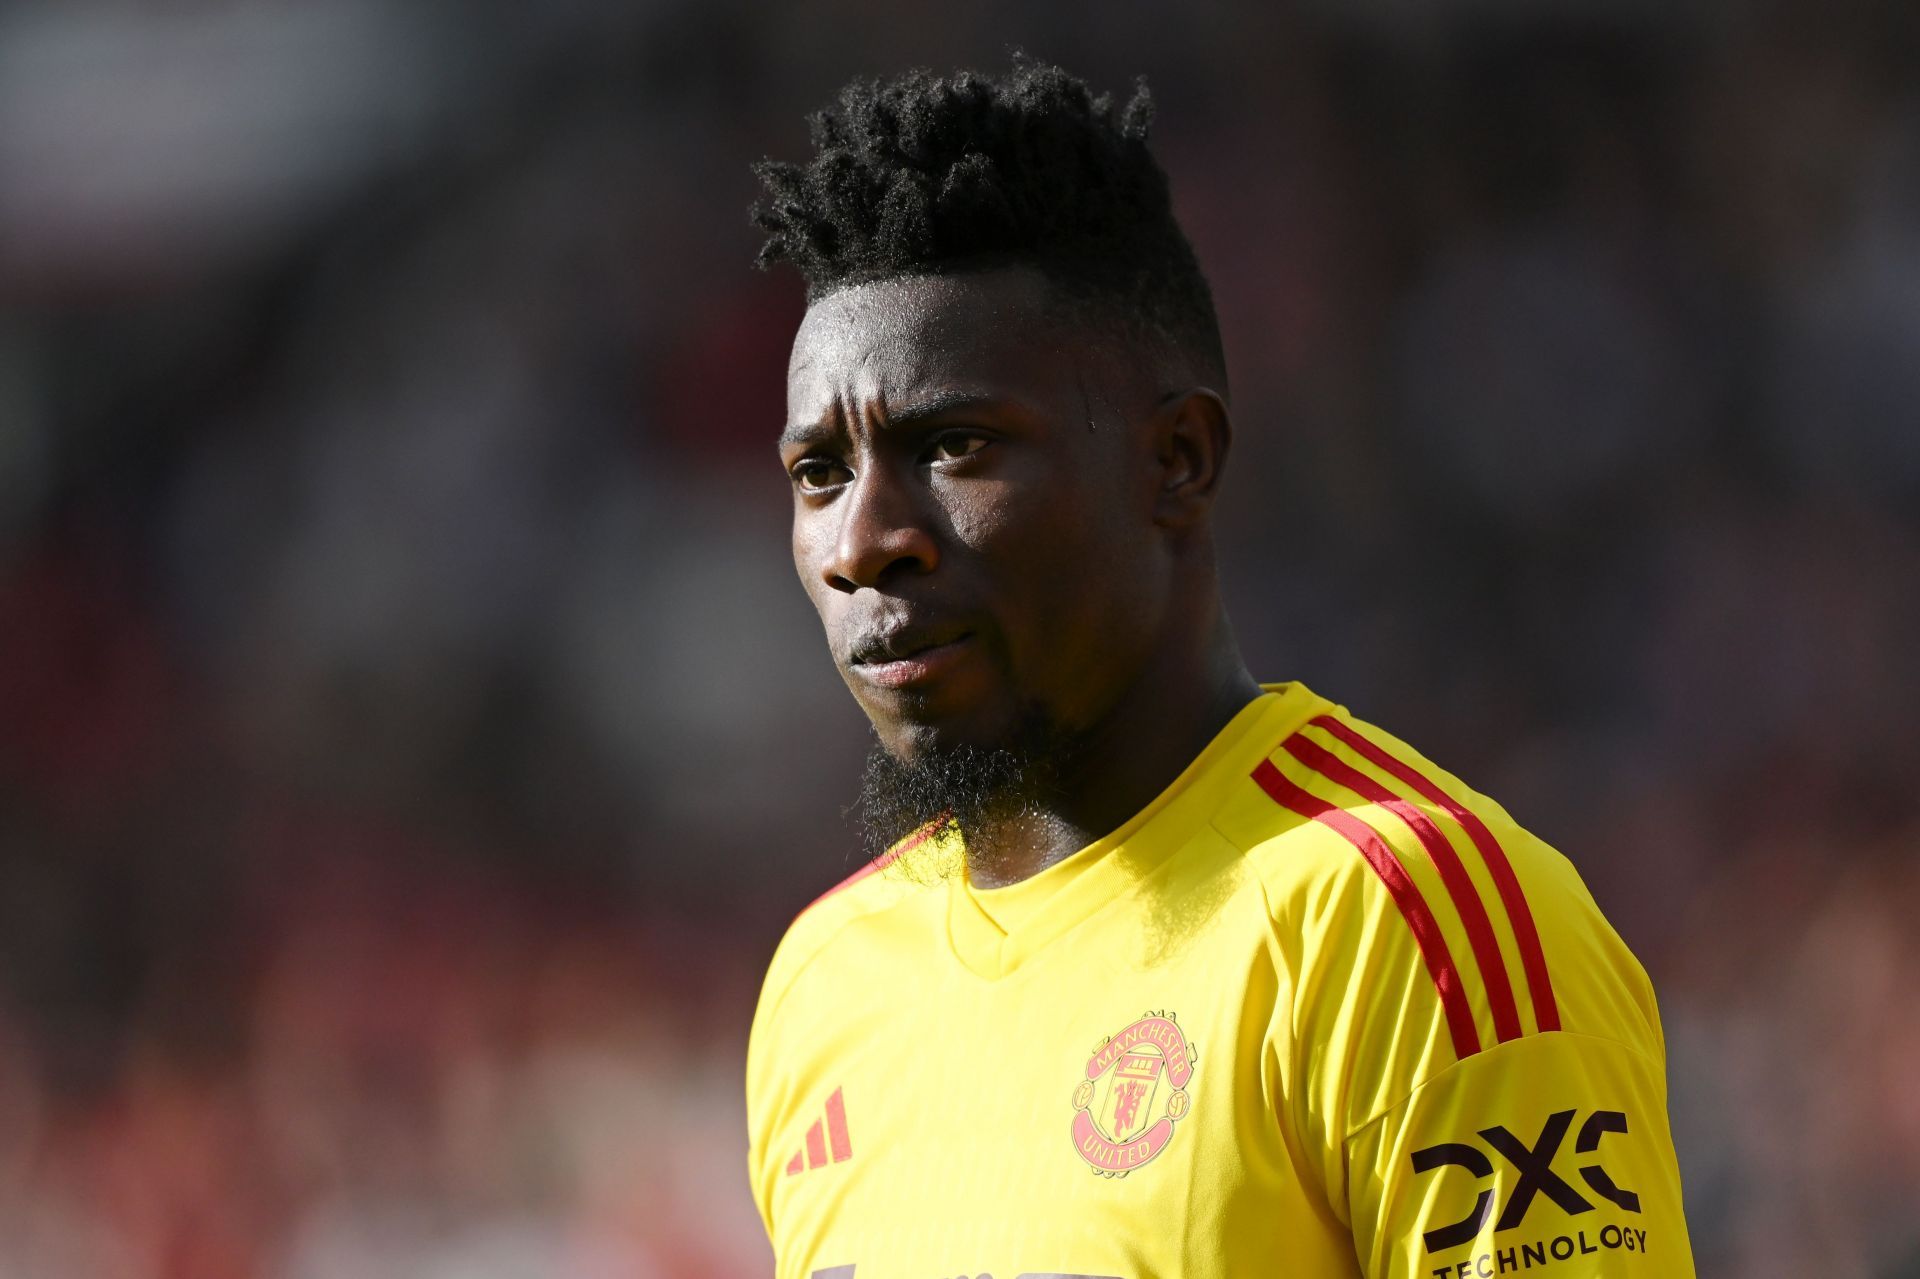 Andre Onana has struggled in the early stages of his Old Trafford career.